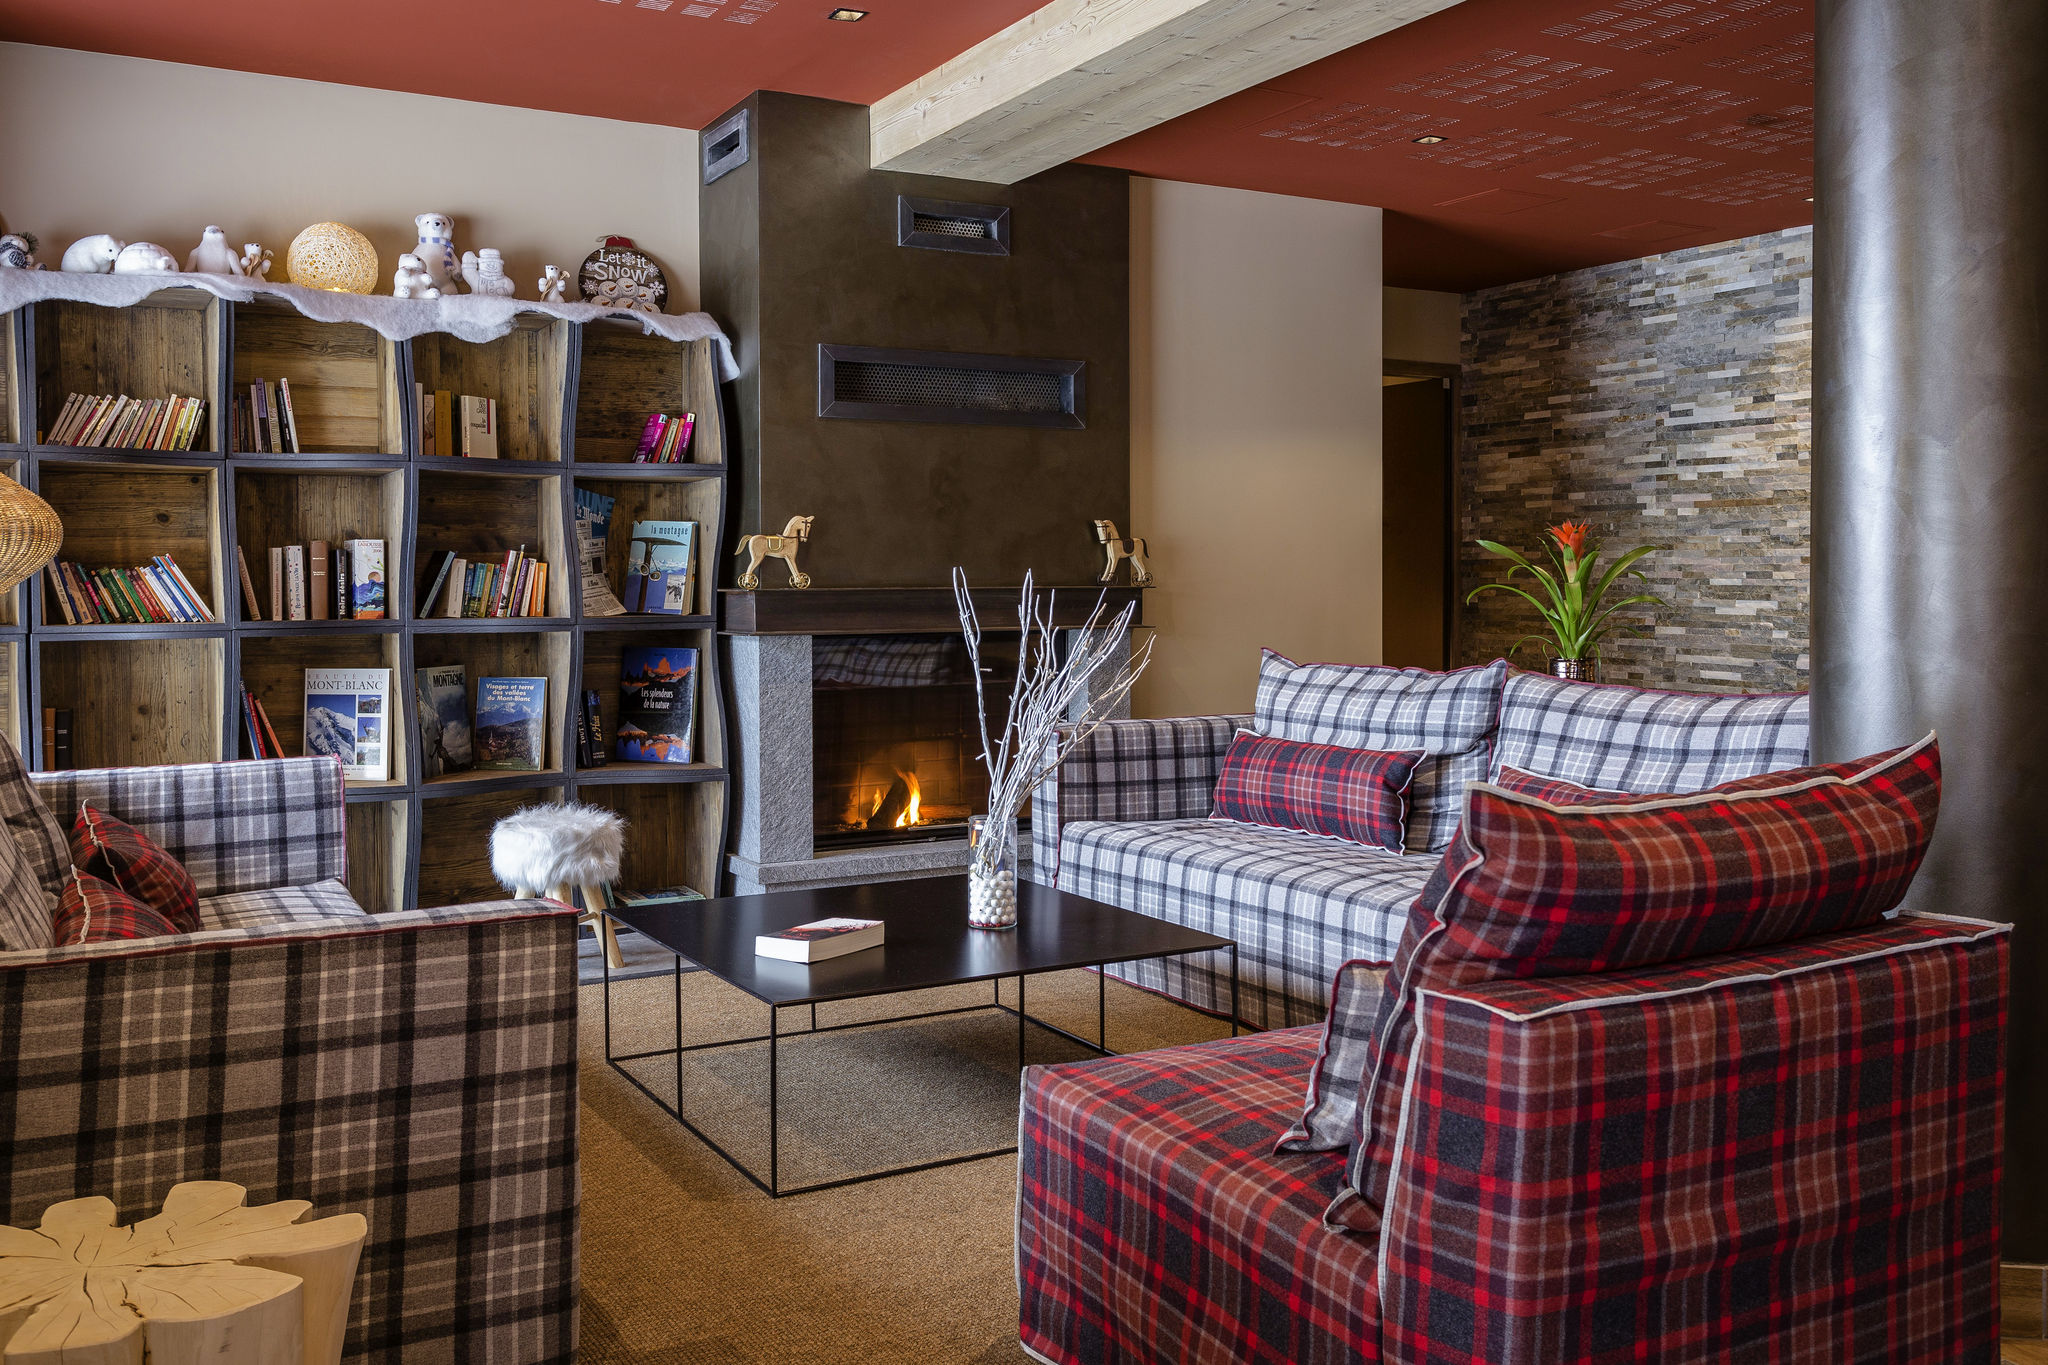 Pleasing apartment 300 m from the ski lift in a mountain village